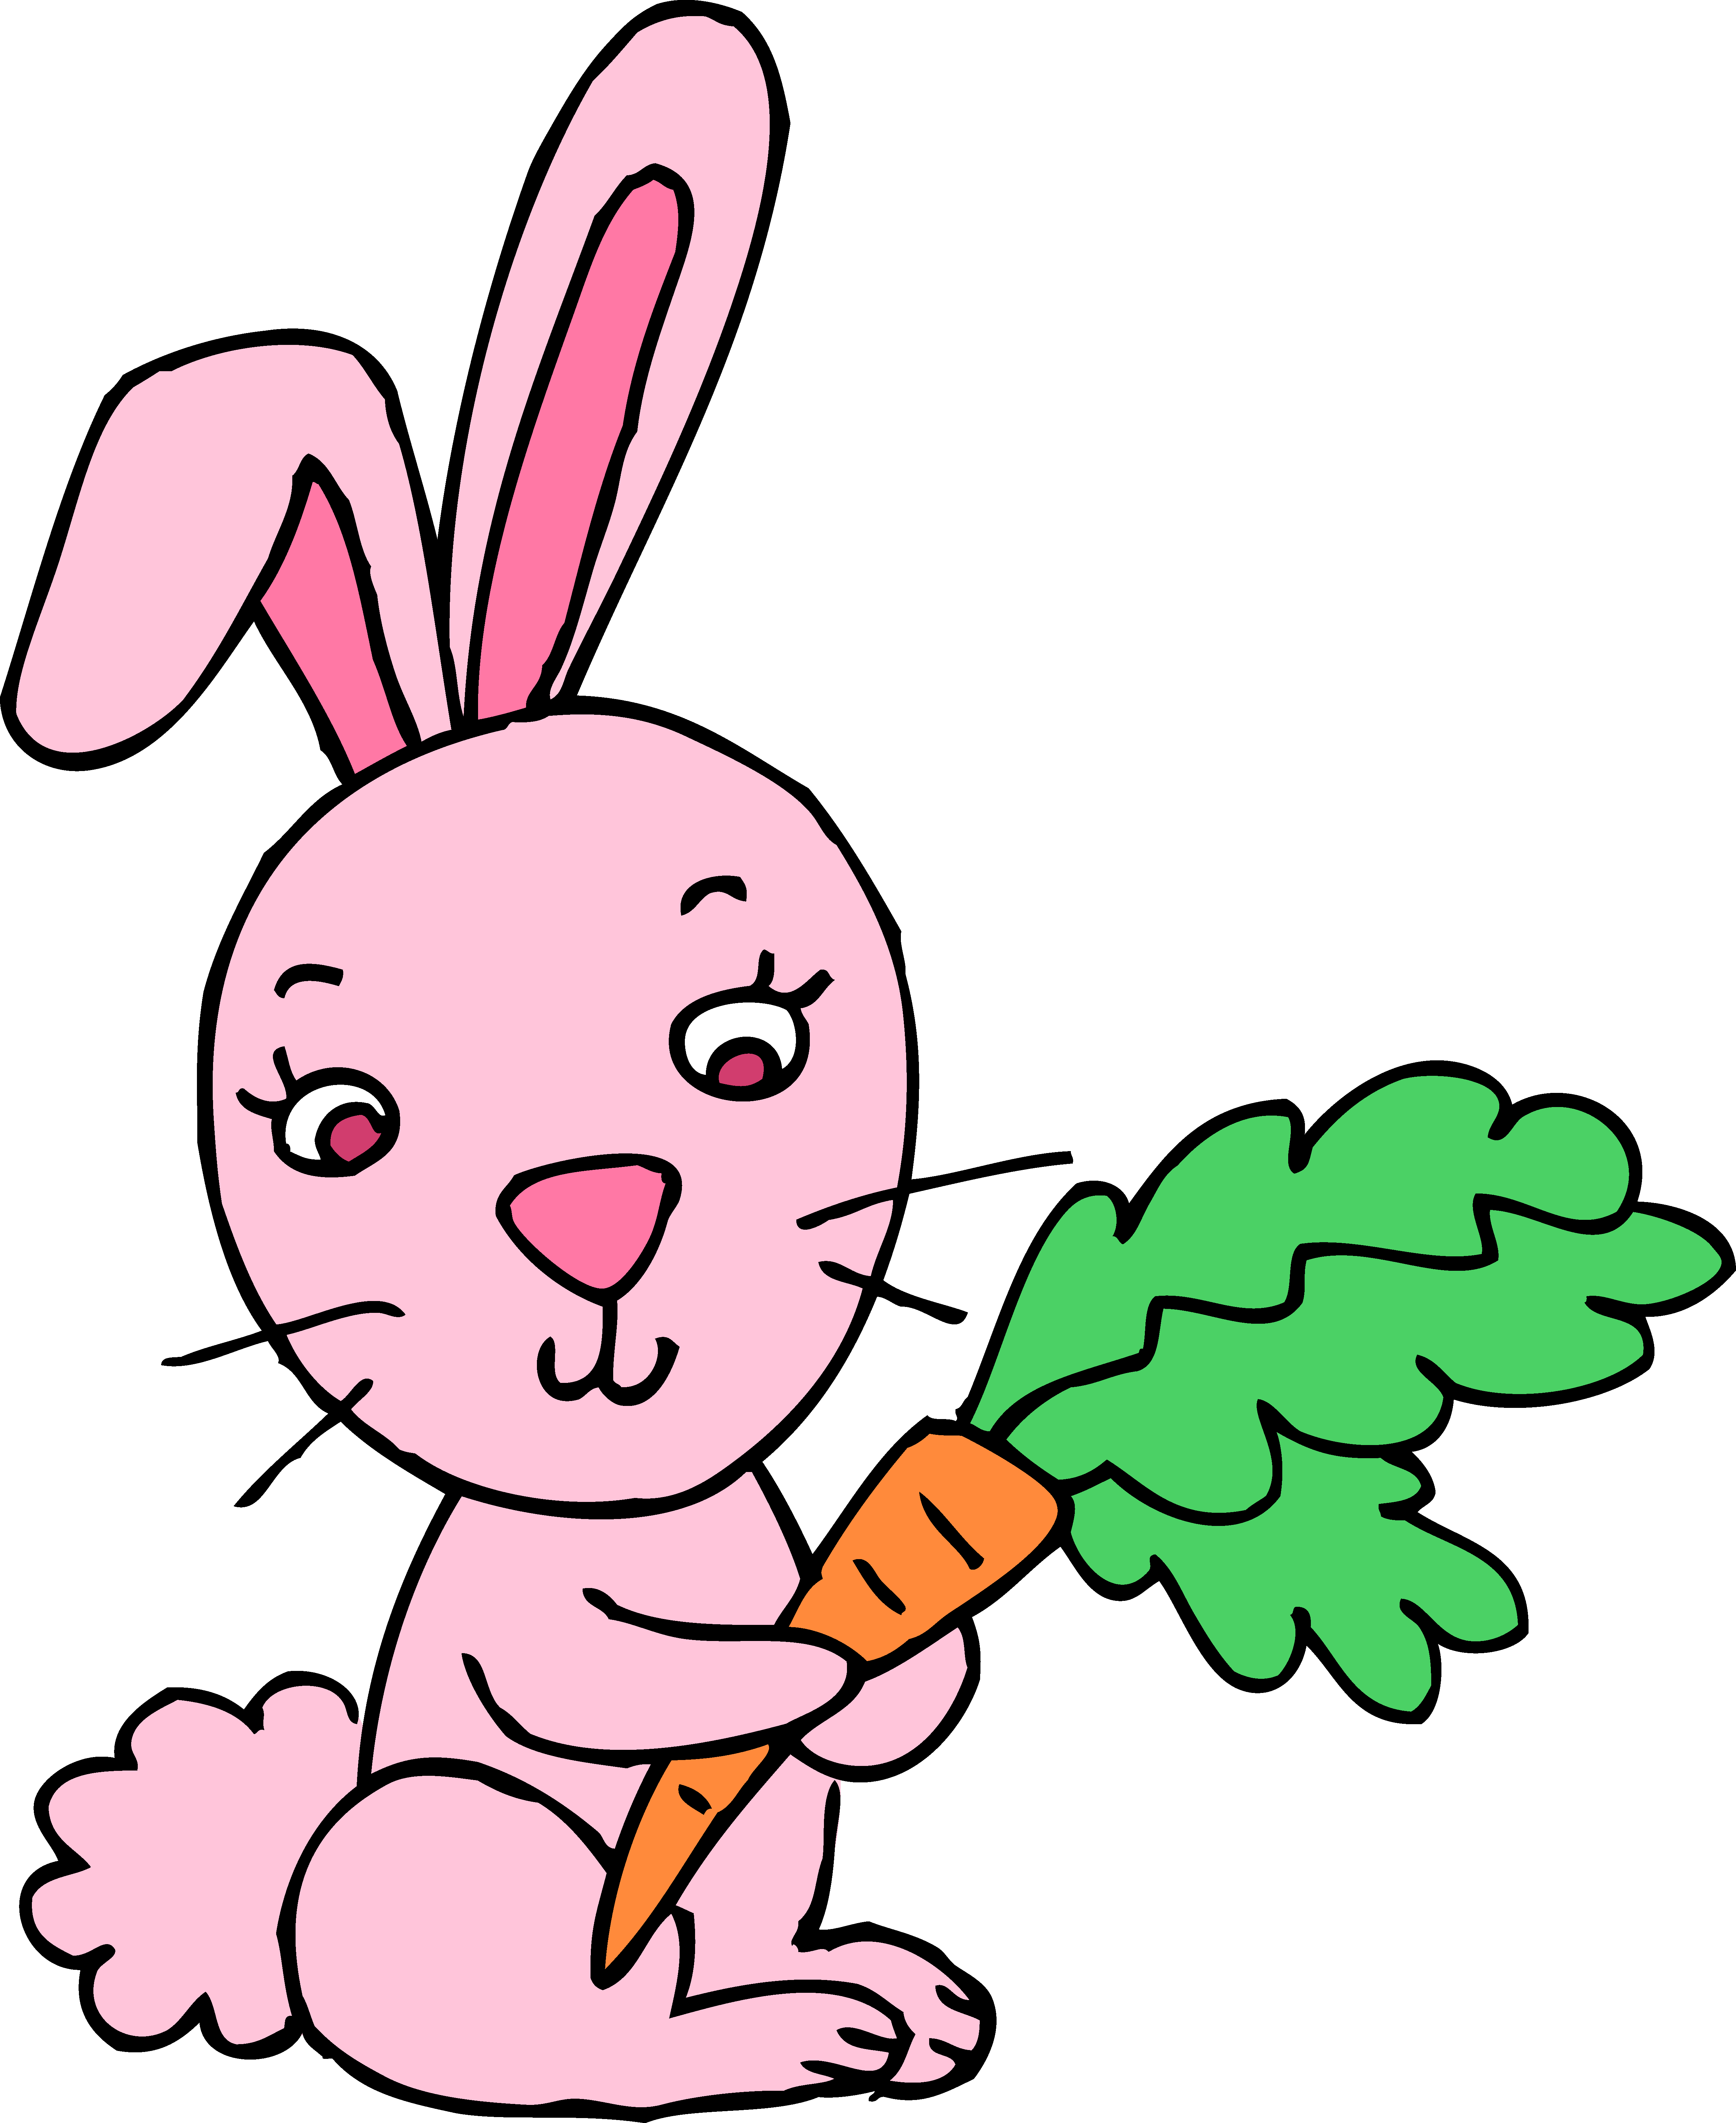 Bunny Outline Clipart | Free download on ClipArtMag